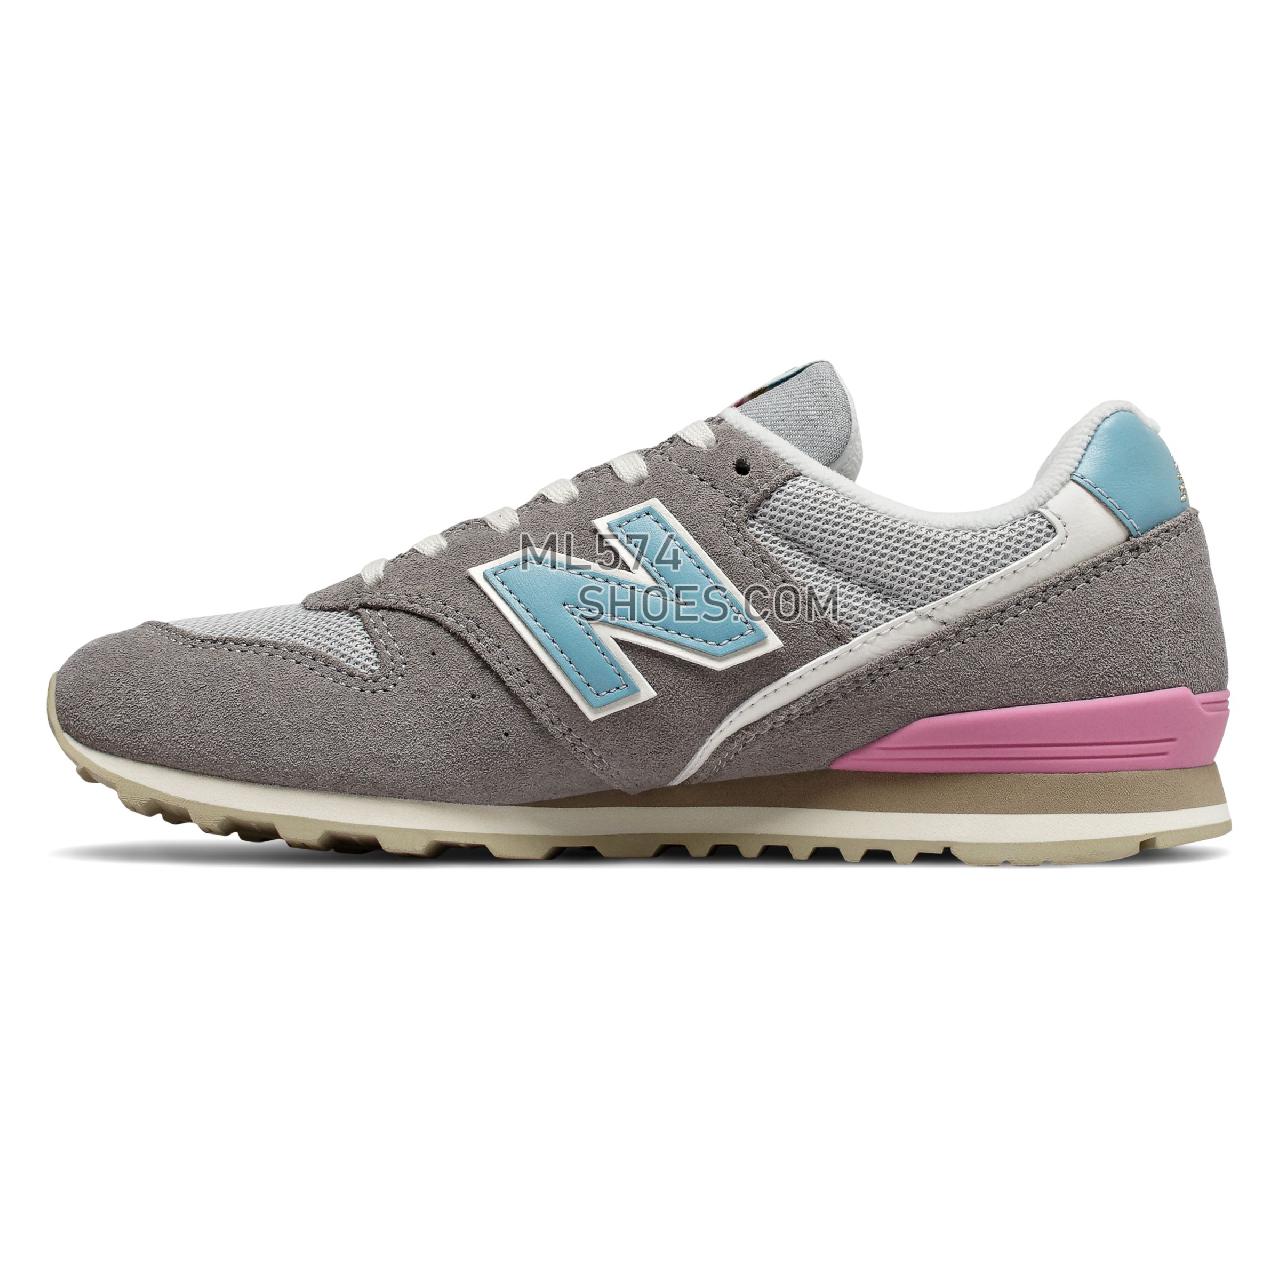 New Balance 996 - Women's 996 Classic - Marblehead with Wax Blue - WL996COL